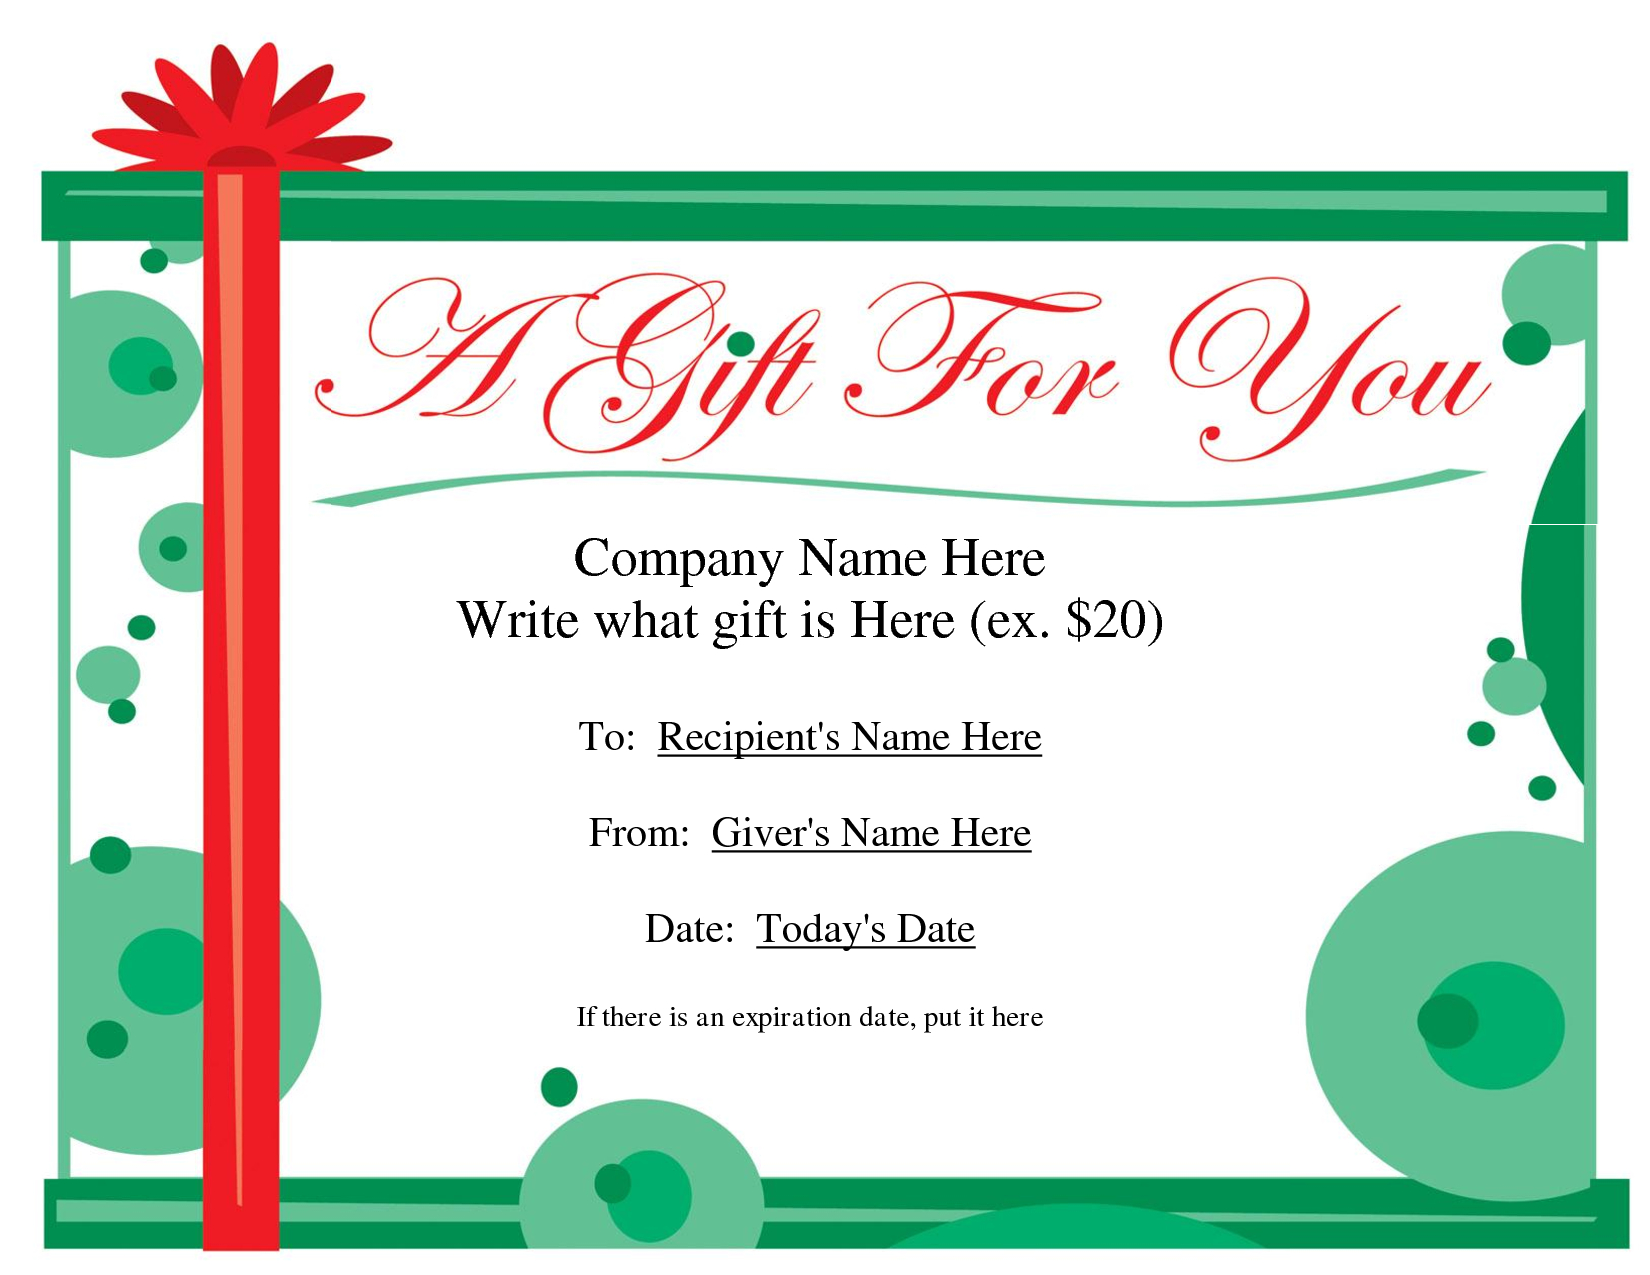 Free Christmas Gift Certificate Templates | Ideas For The House - Free Printable Christmas Gift Voucher Templates